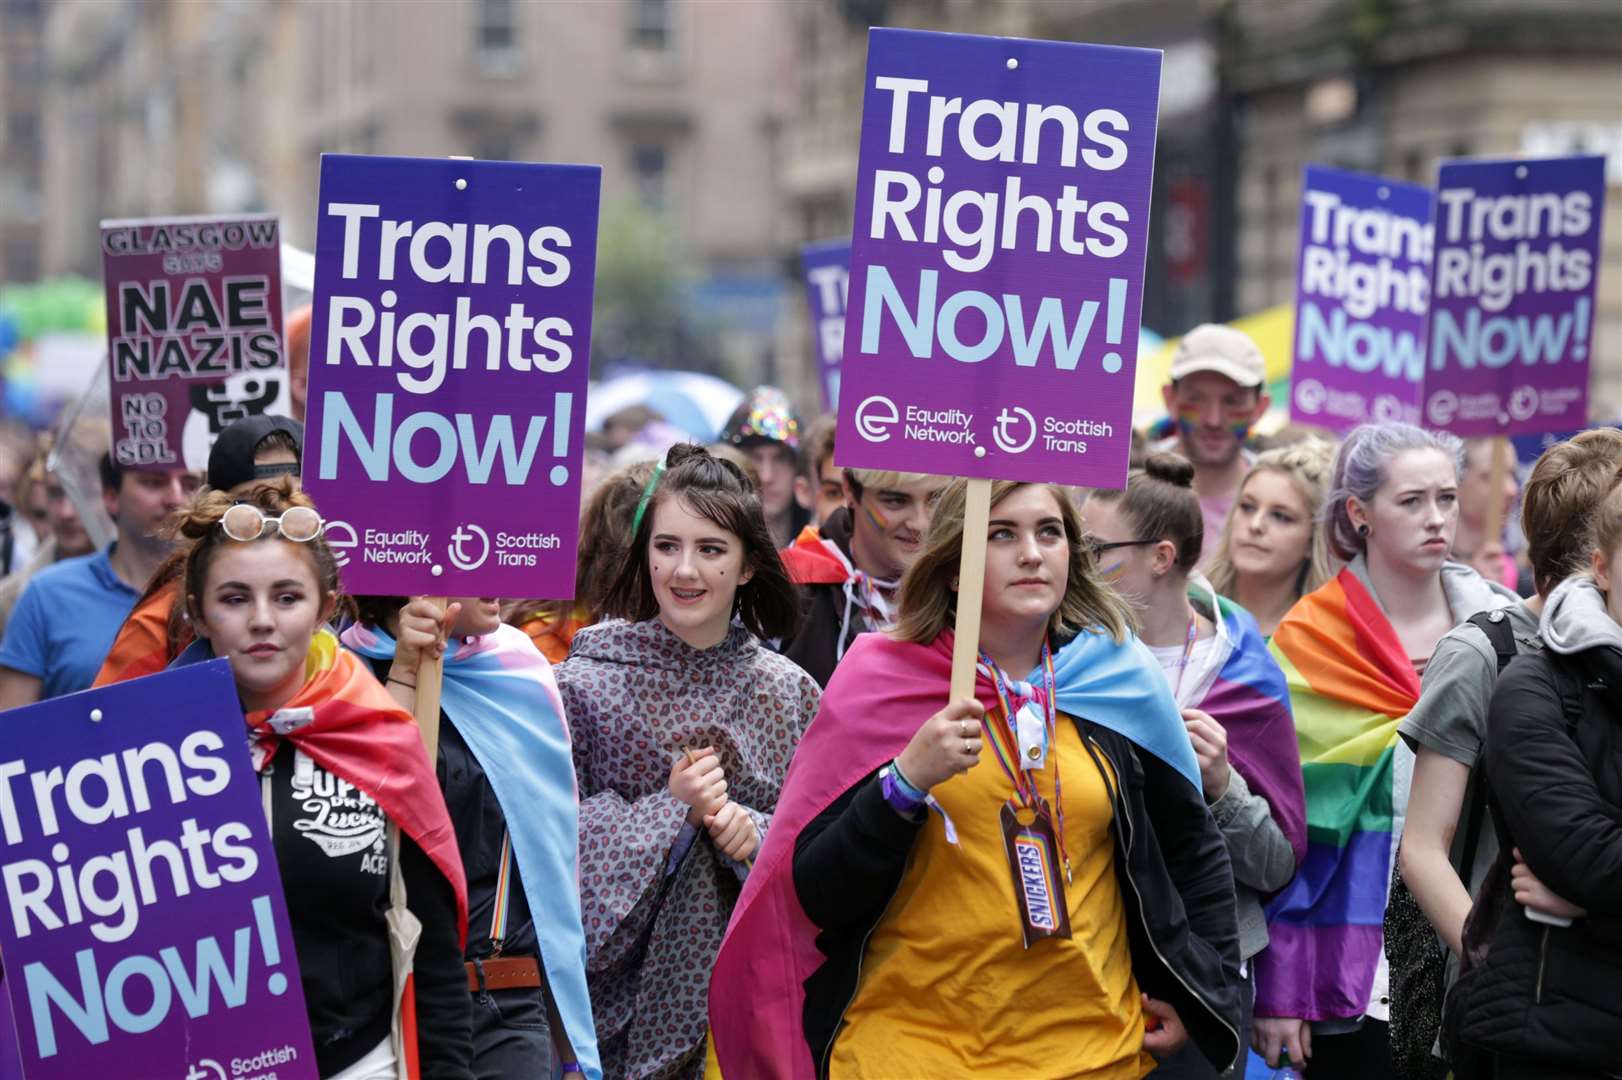 People carrying trans rights banners taking part in the Pride Glasgow parade (David Cheskin/PA)